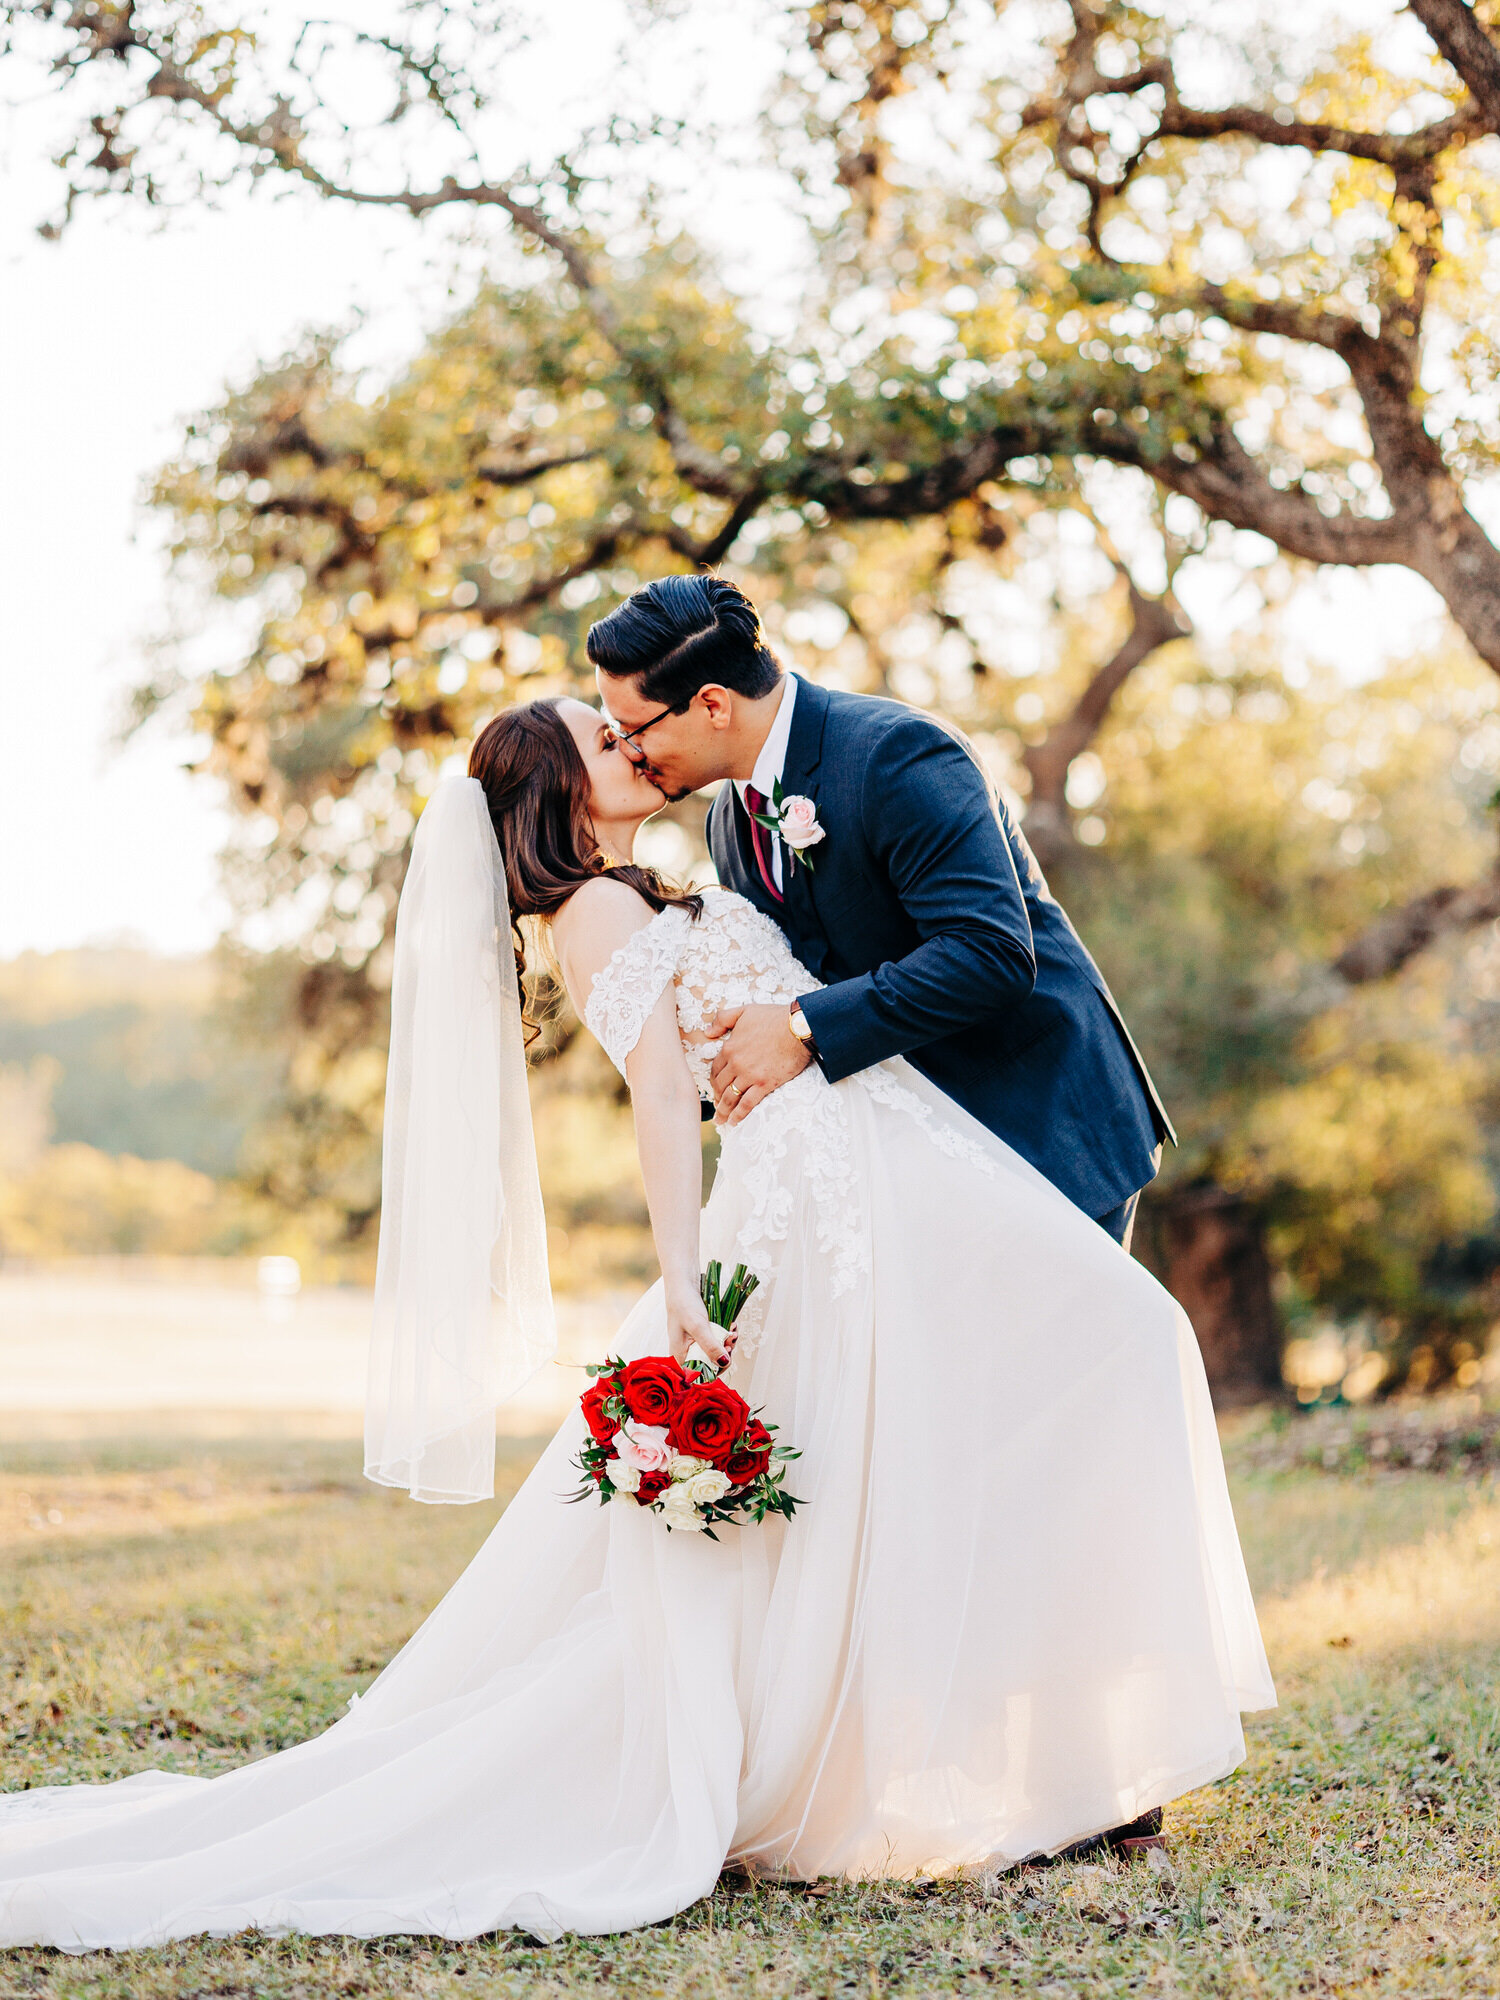 This image features a bride and a groom at a fall wedding. The groom, wearing a blue suit and a burgundy tie,  is dipping his bride while kissing her. The bride is wearing a mid-length veil. The image was taken by KD Captures, a wedding photographer in Austin.